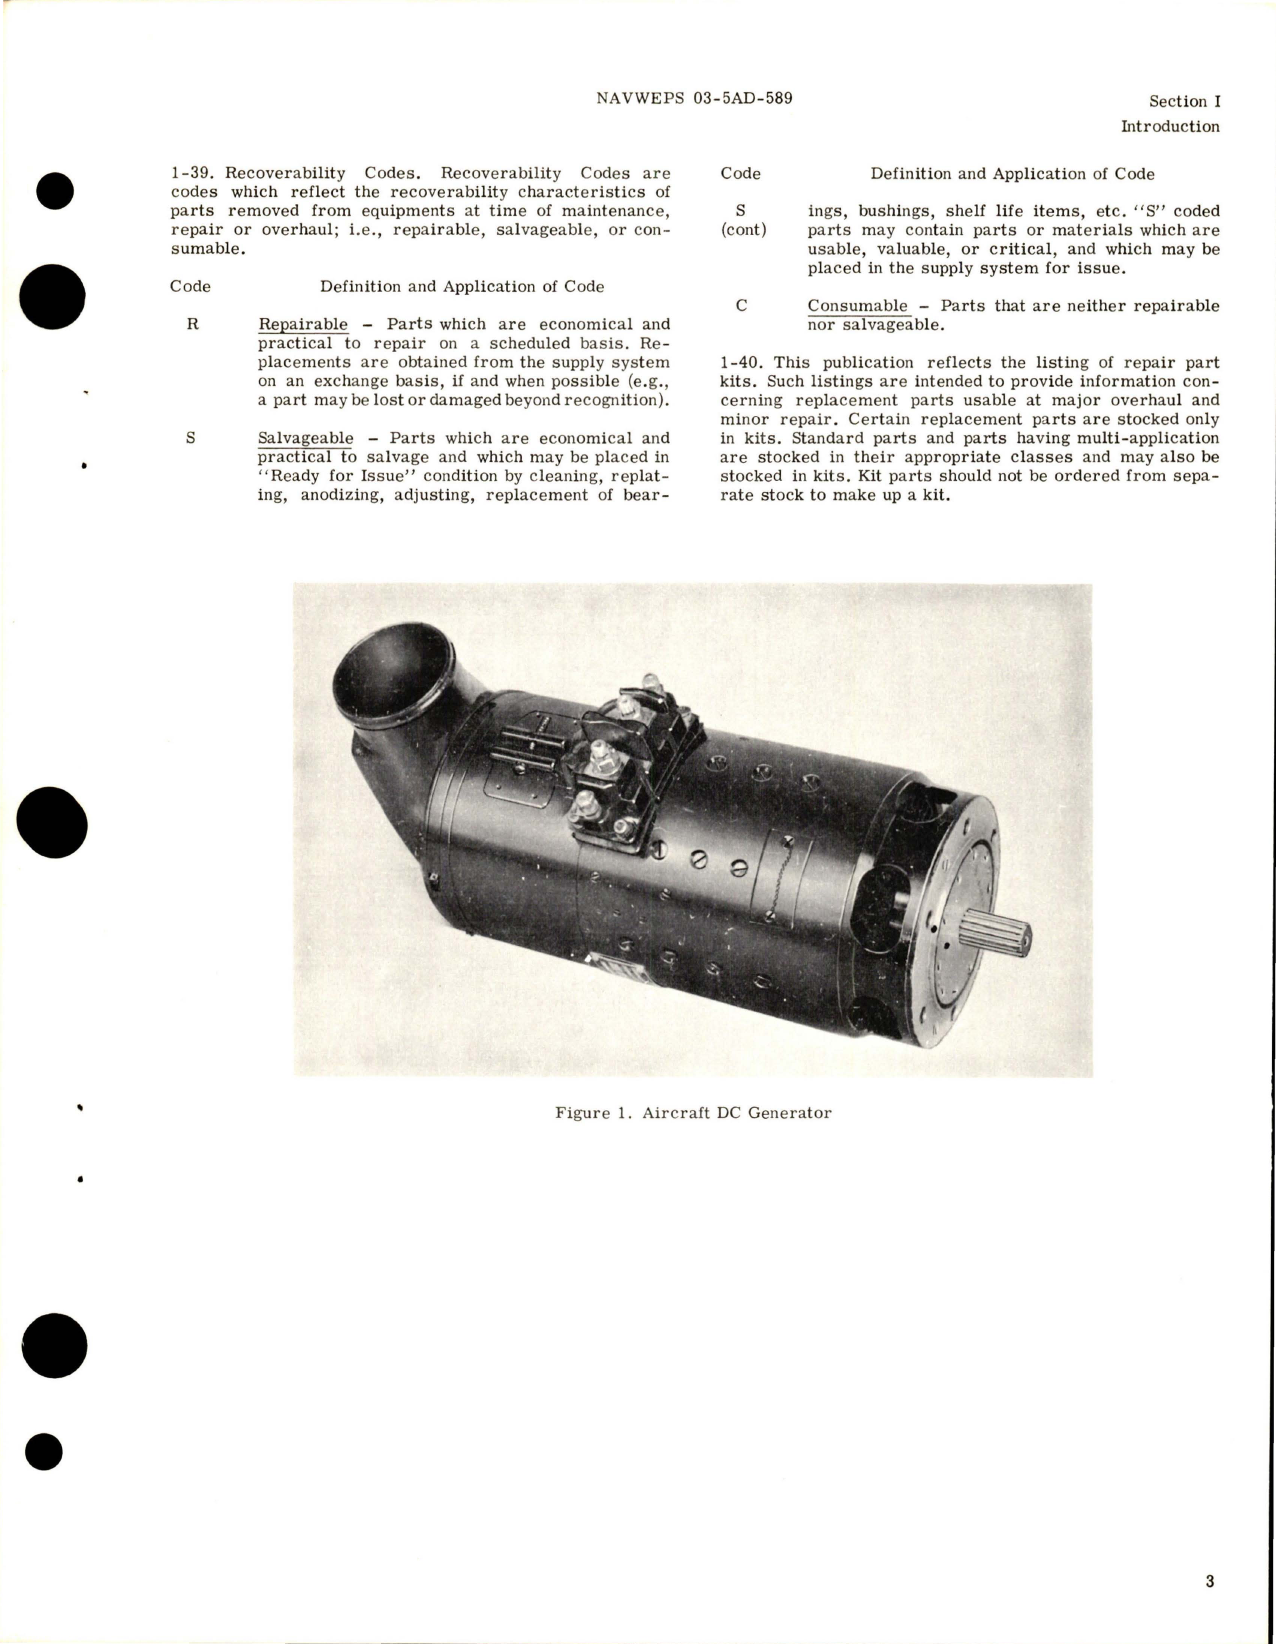 Sample page 5 from AirCorps Library document: Illustrated Parts Breakdown for DC Generators - Models 2CM76C4, 2CM76C4A, 2CM76E4, 2CM76E4C, 2CM76E5